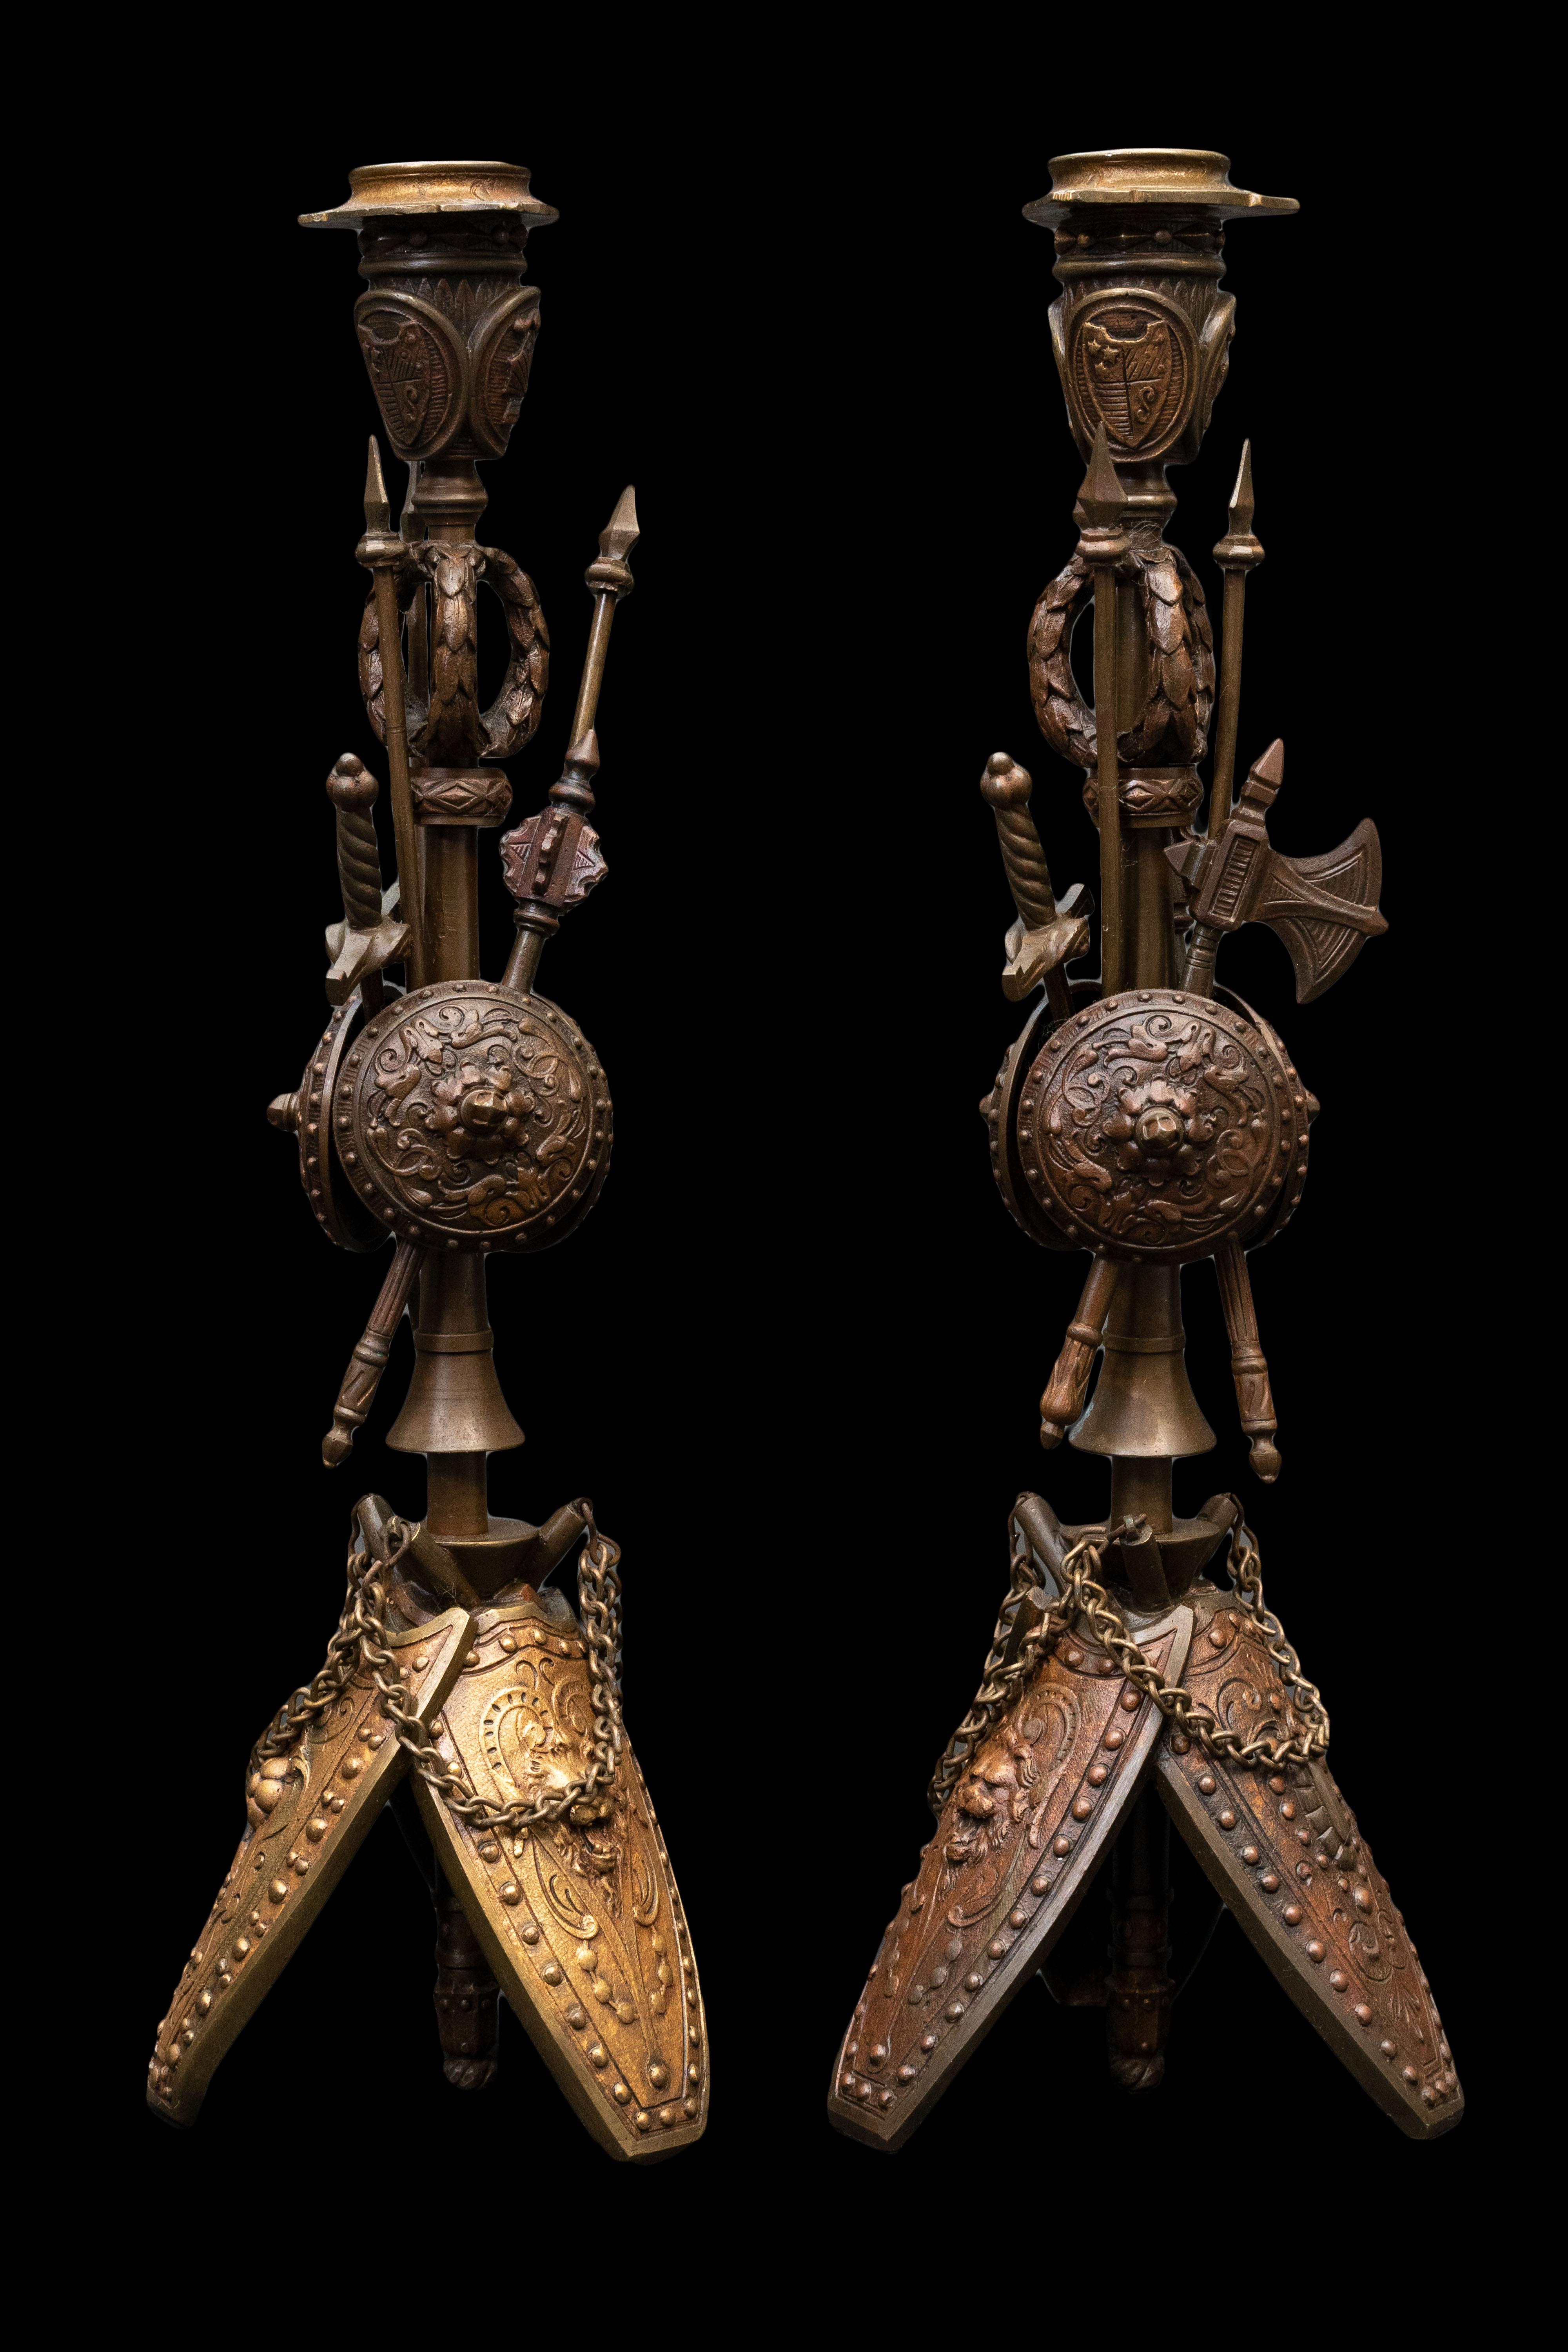 A pair of patinated bronze military candlesticks.

Measures Approximately: 4